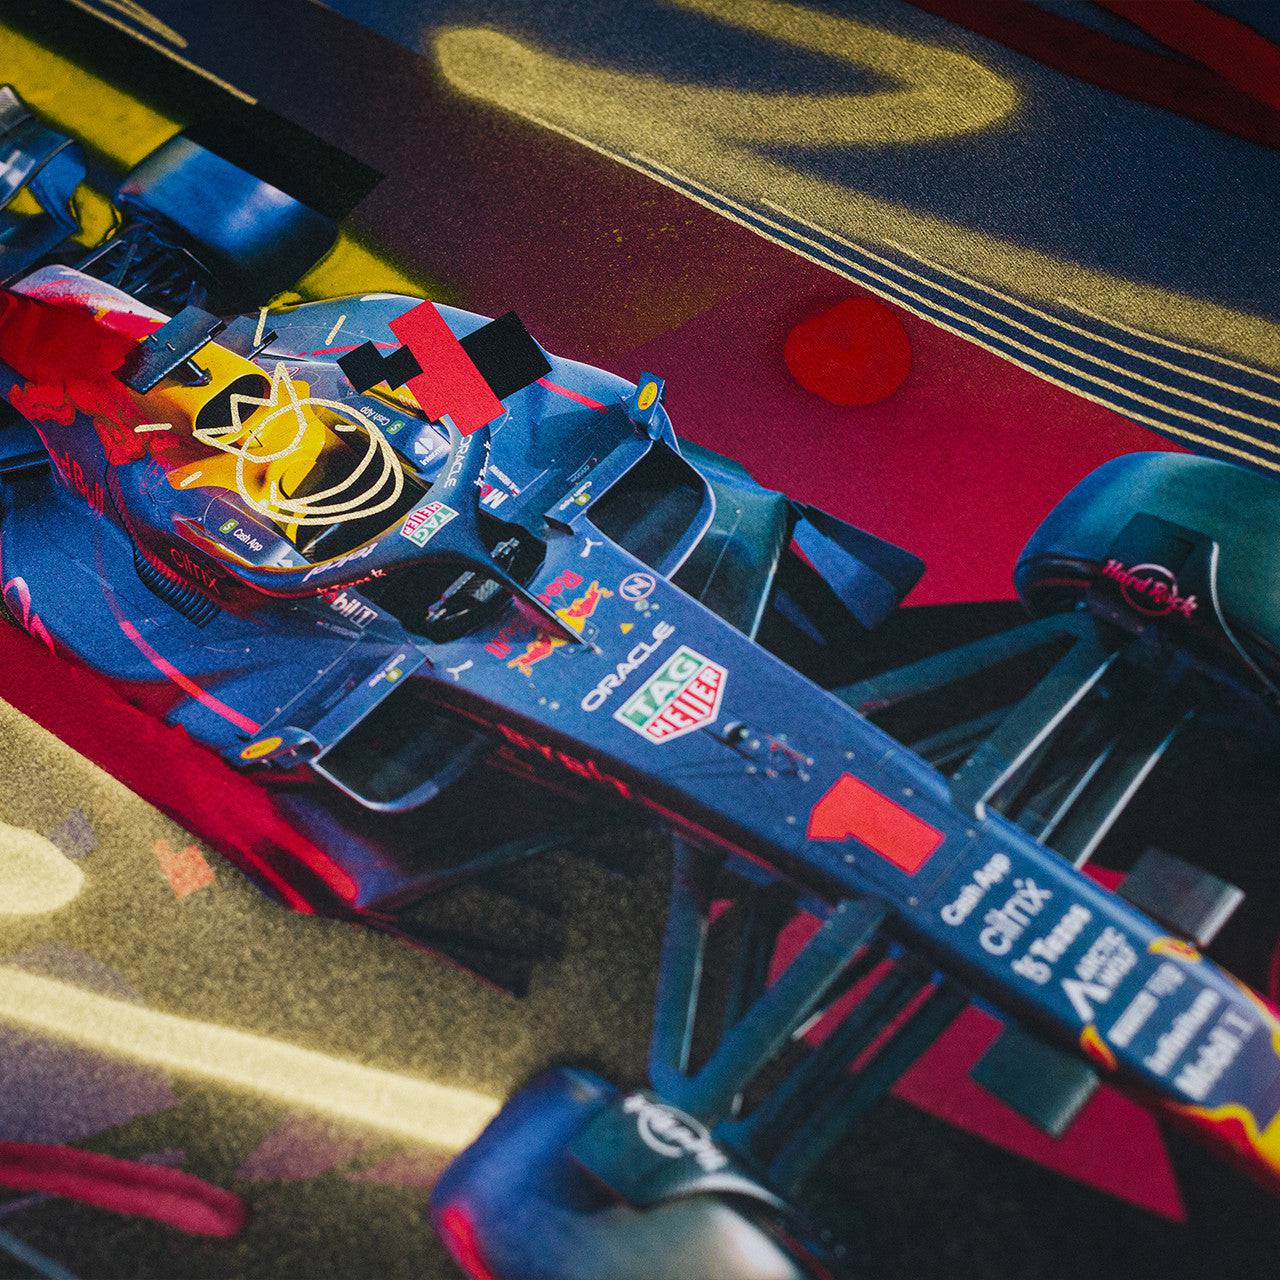 Oracle Red Bull Racing - Max Verstappen - Art to the Max - 2022 | Art Edition | #17/25